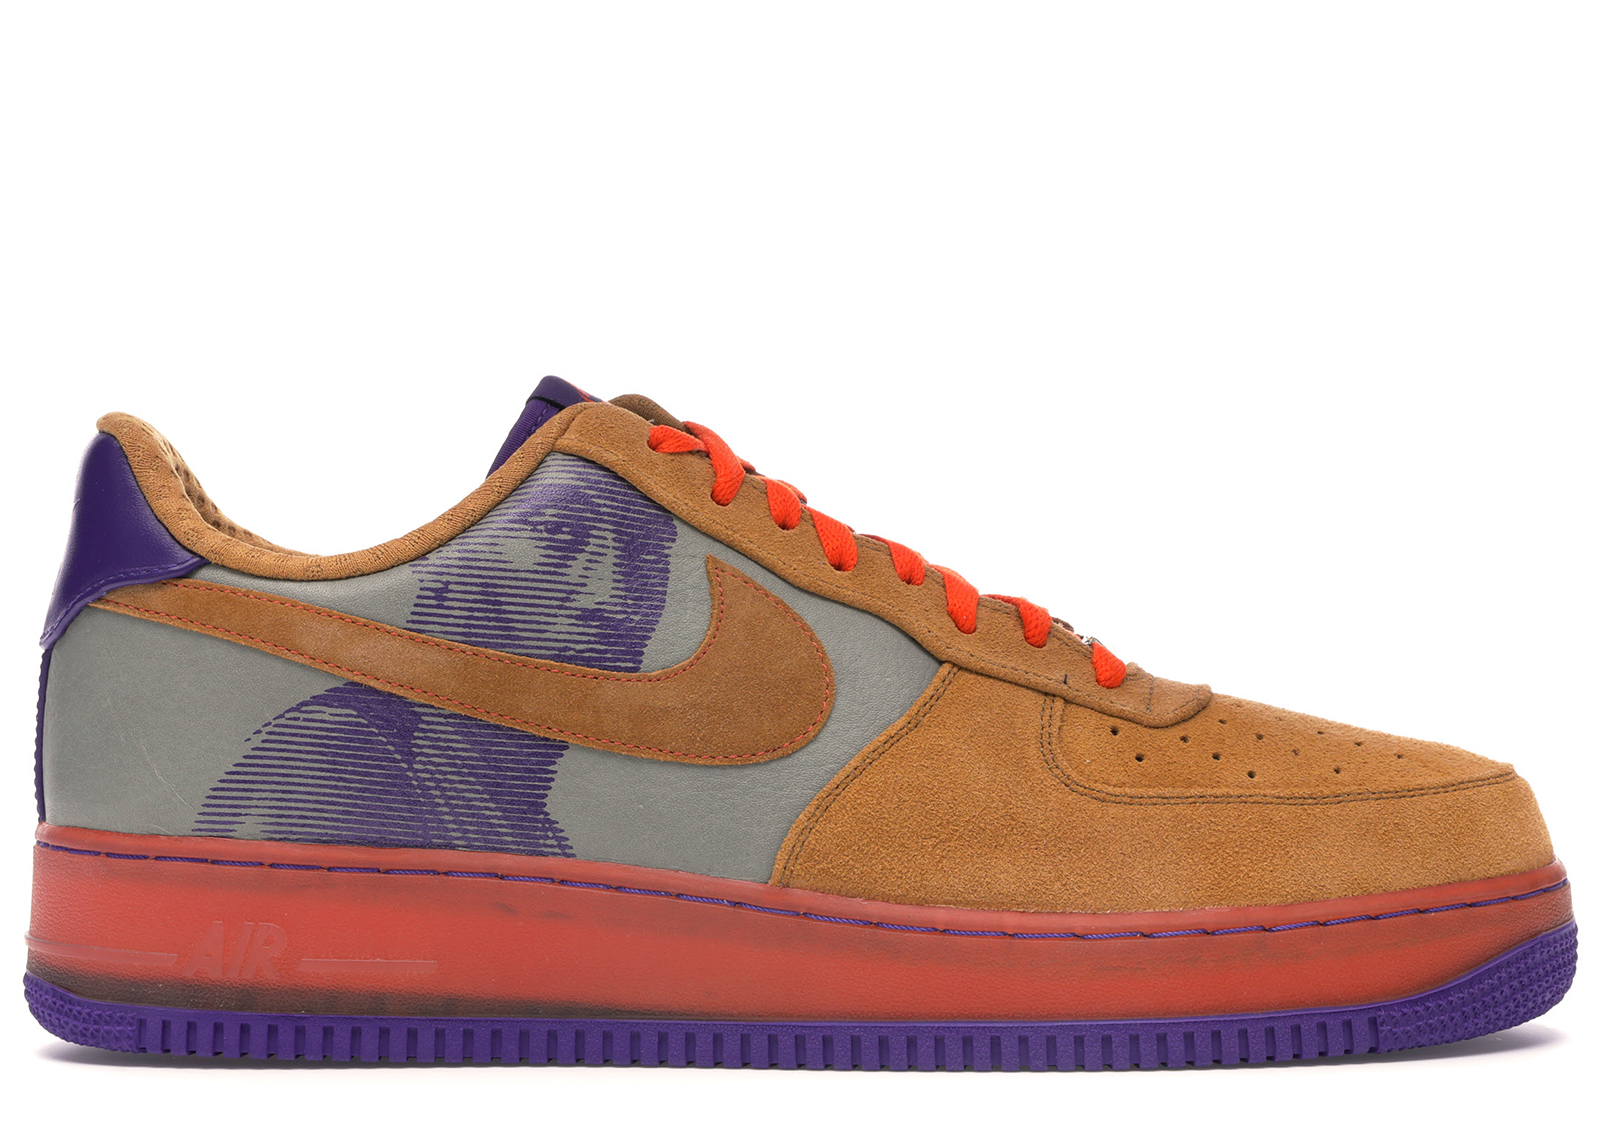 amare stoudemire air force 1